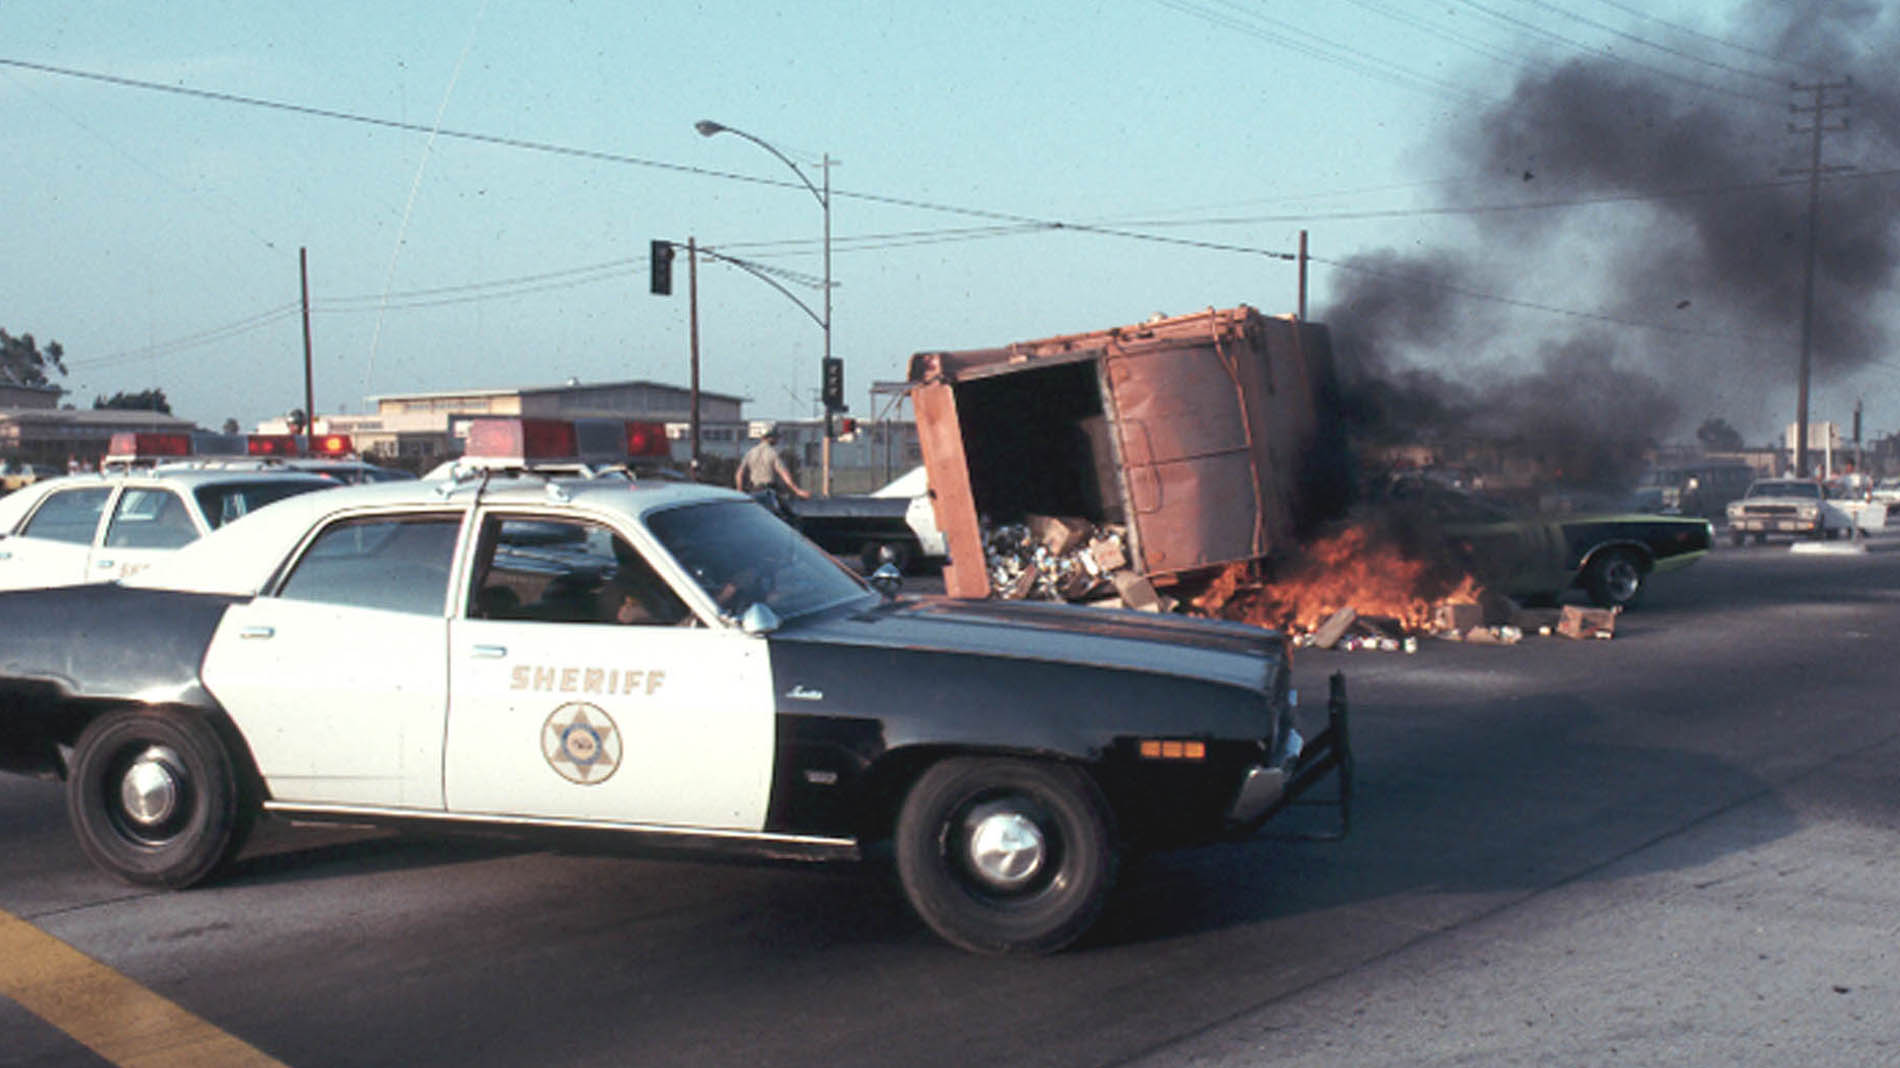 37.Trash truck flipps over and starts on fire